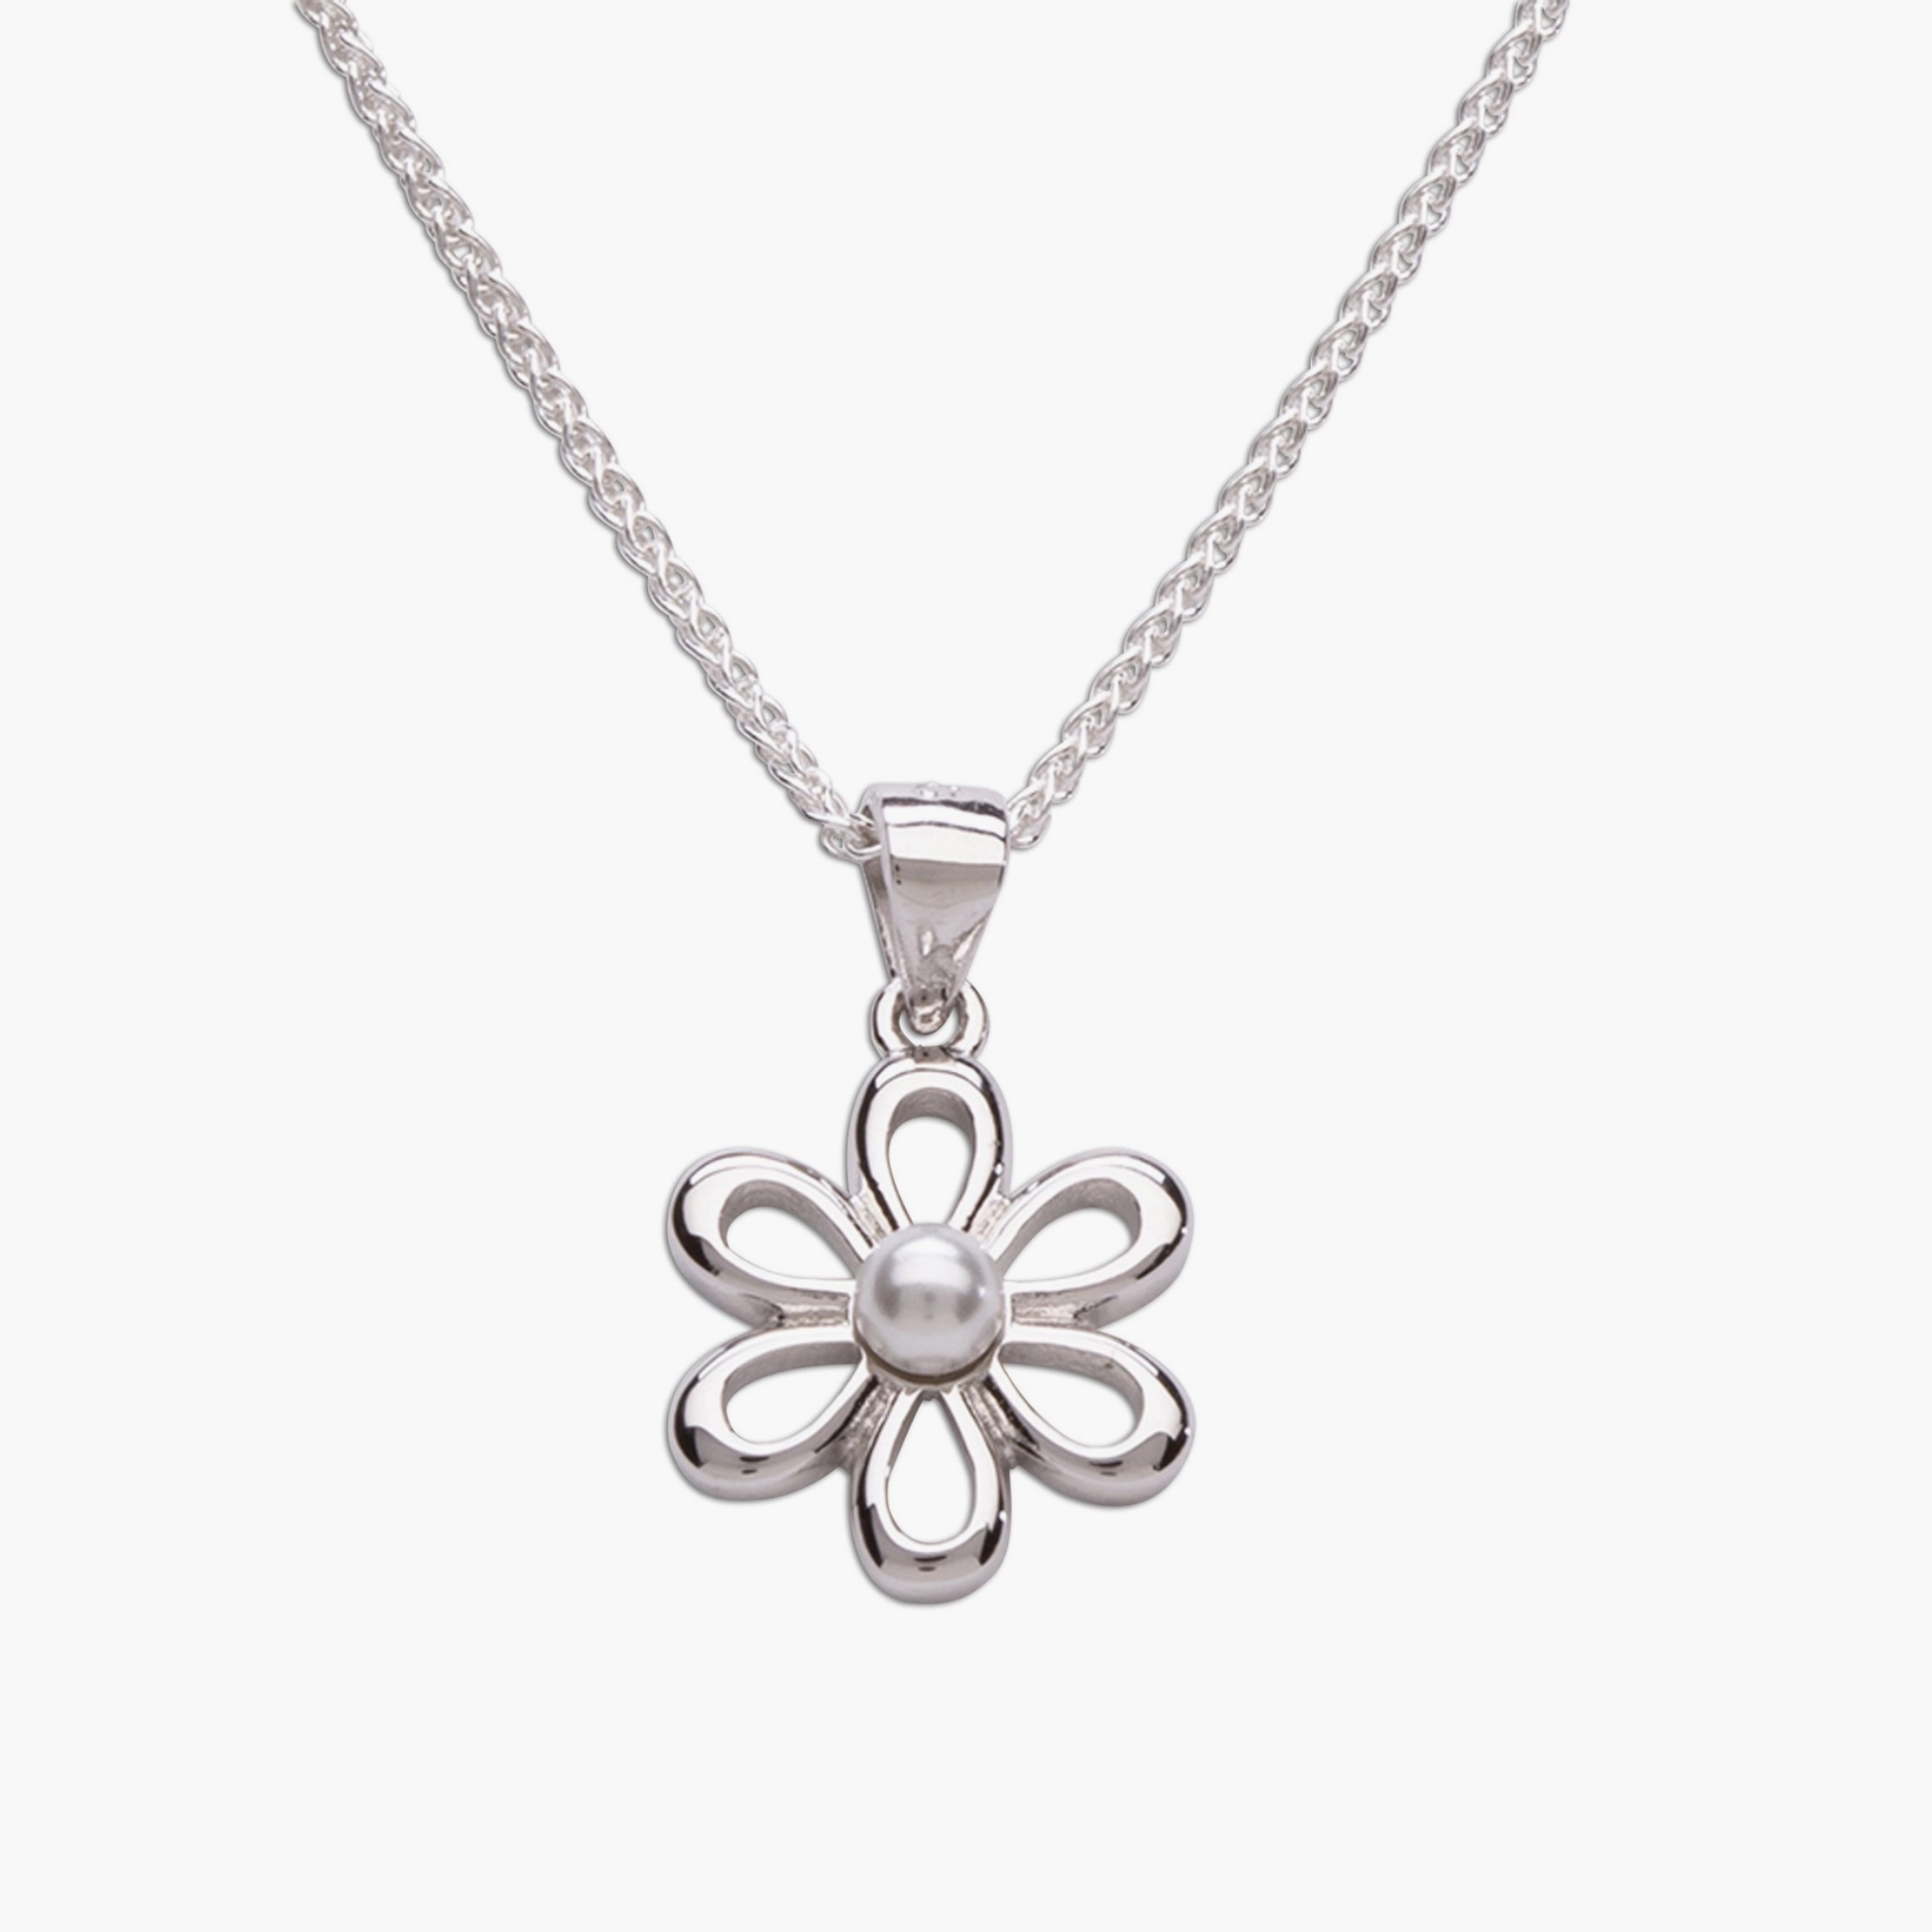 Tiny Daisy Necklace | Simple Flower Necklace - Stranded Treasures